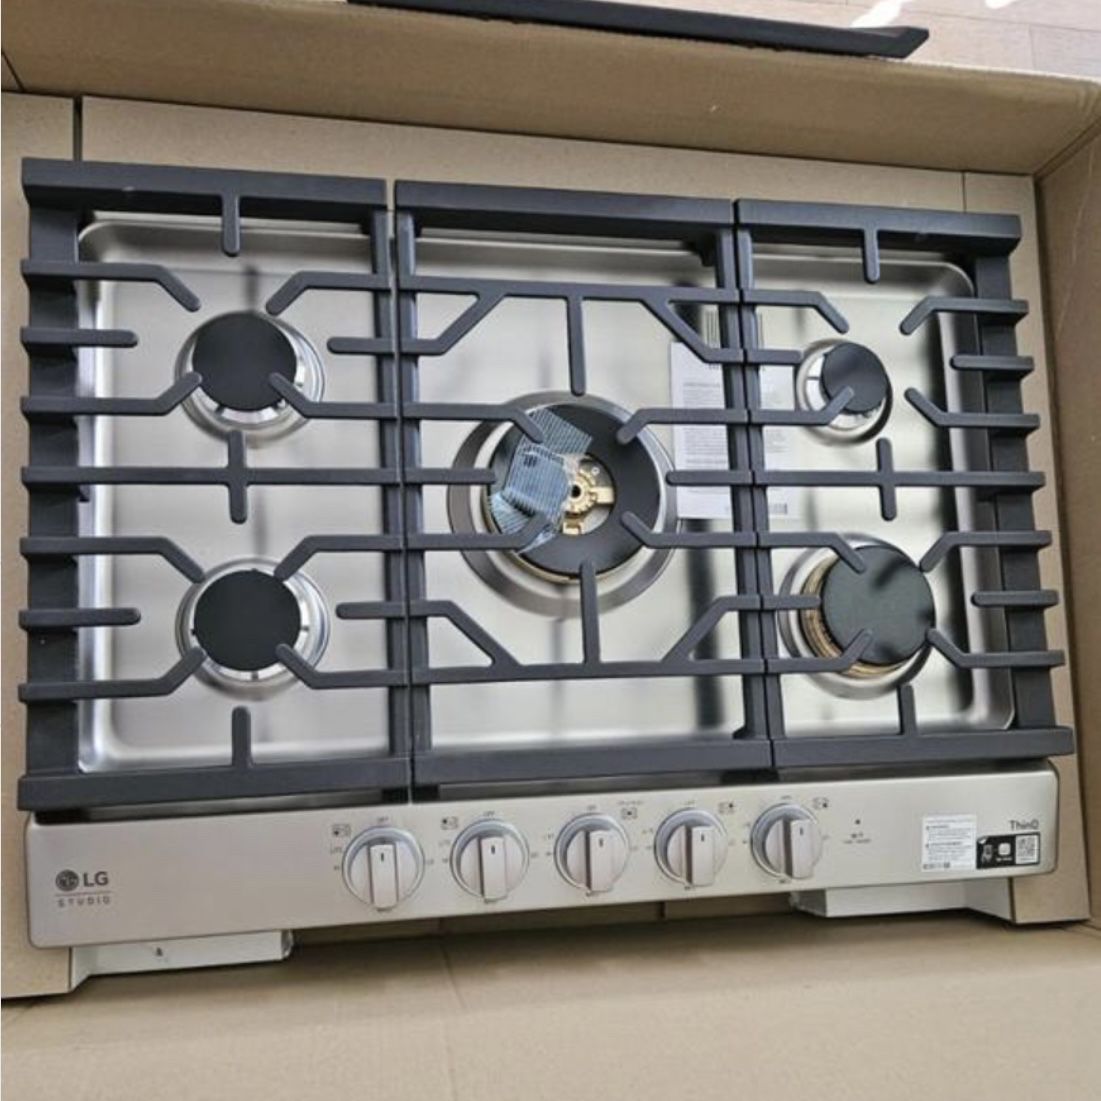 New Lg Studio Stainless Steel 36” Gas CookTop 